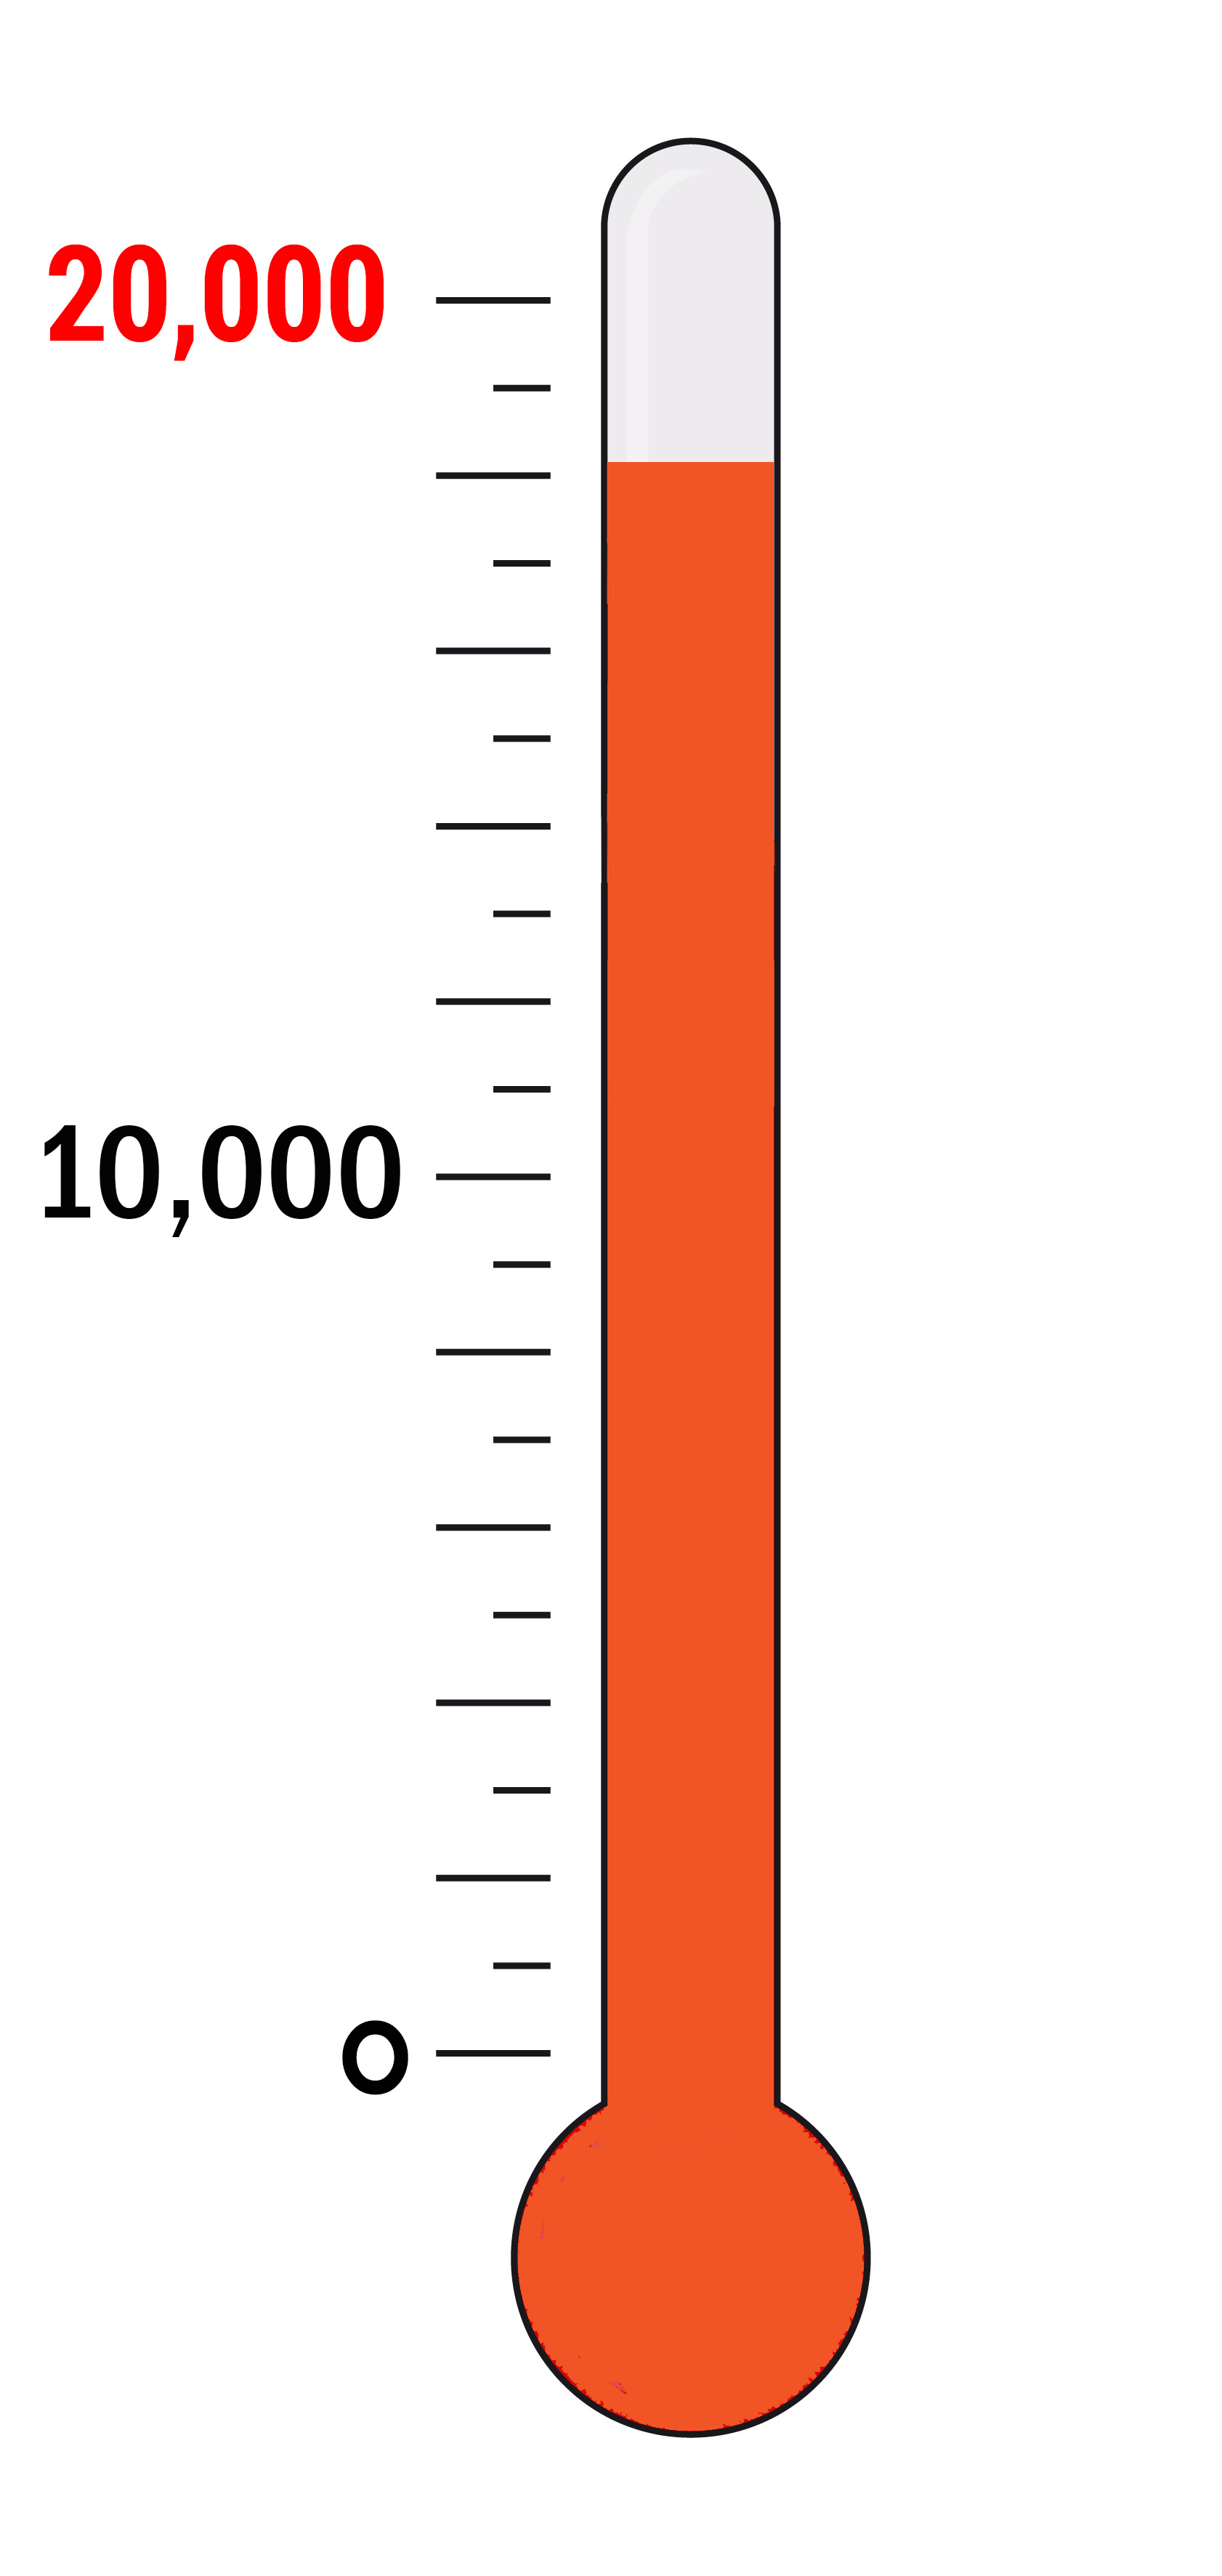 Help us reach our goal of 15,000 MyLymeData participants